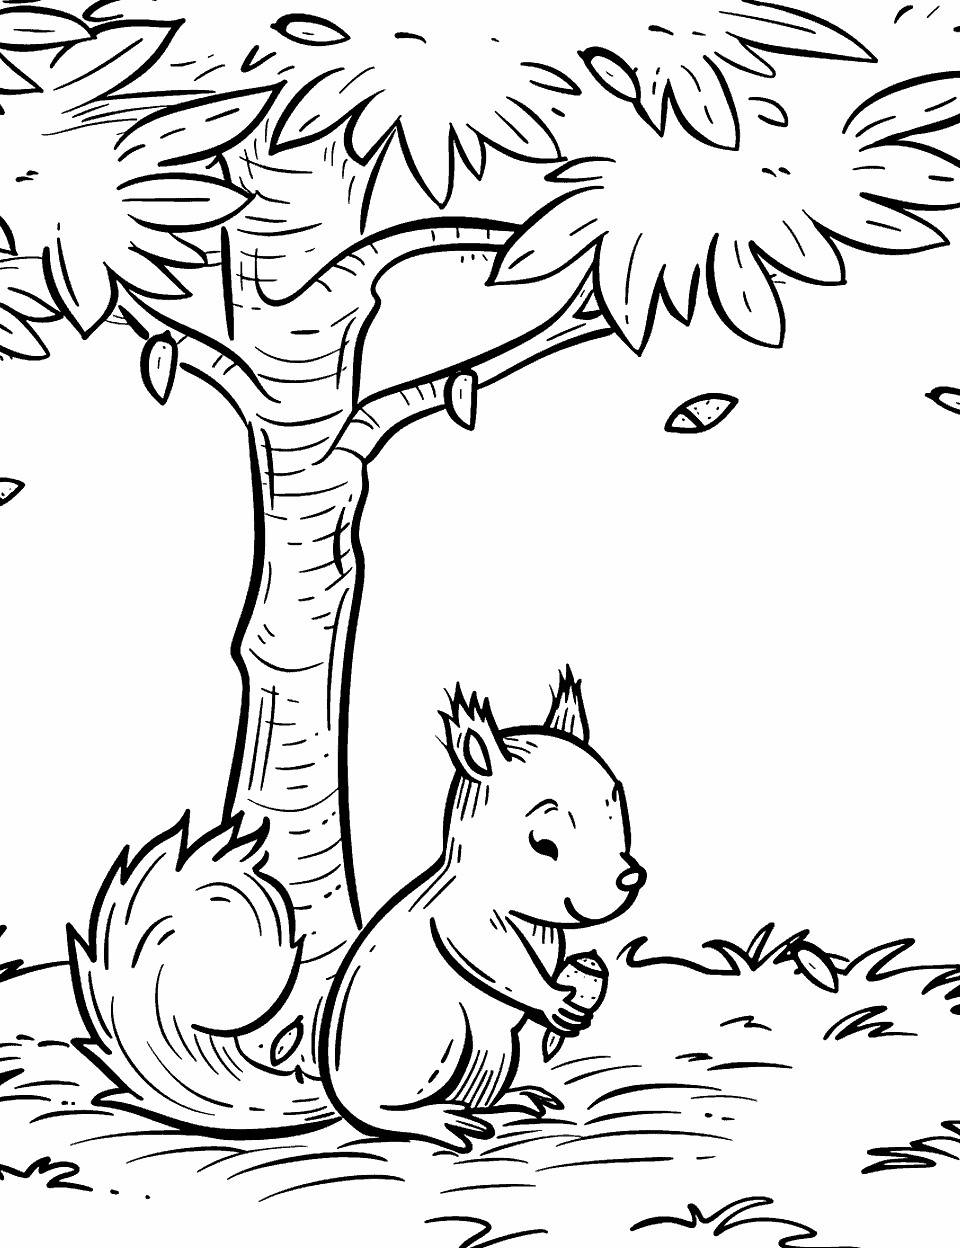 Cute Squirrel Gathering Acorns Coloring Page - A squirrel under an oak tree, collecting acorns for winter.